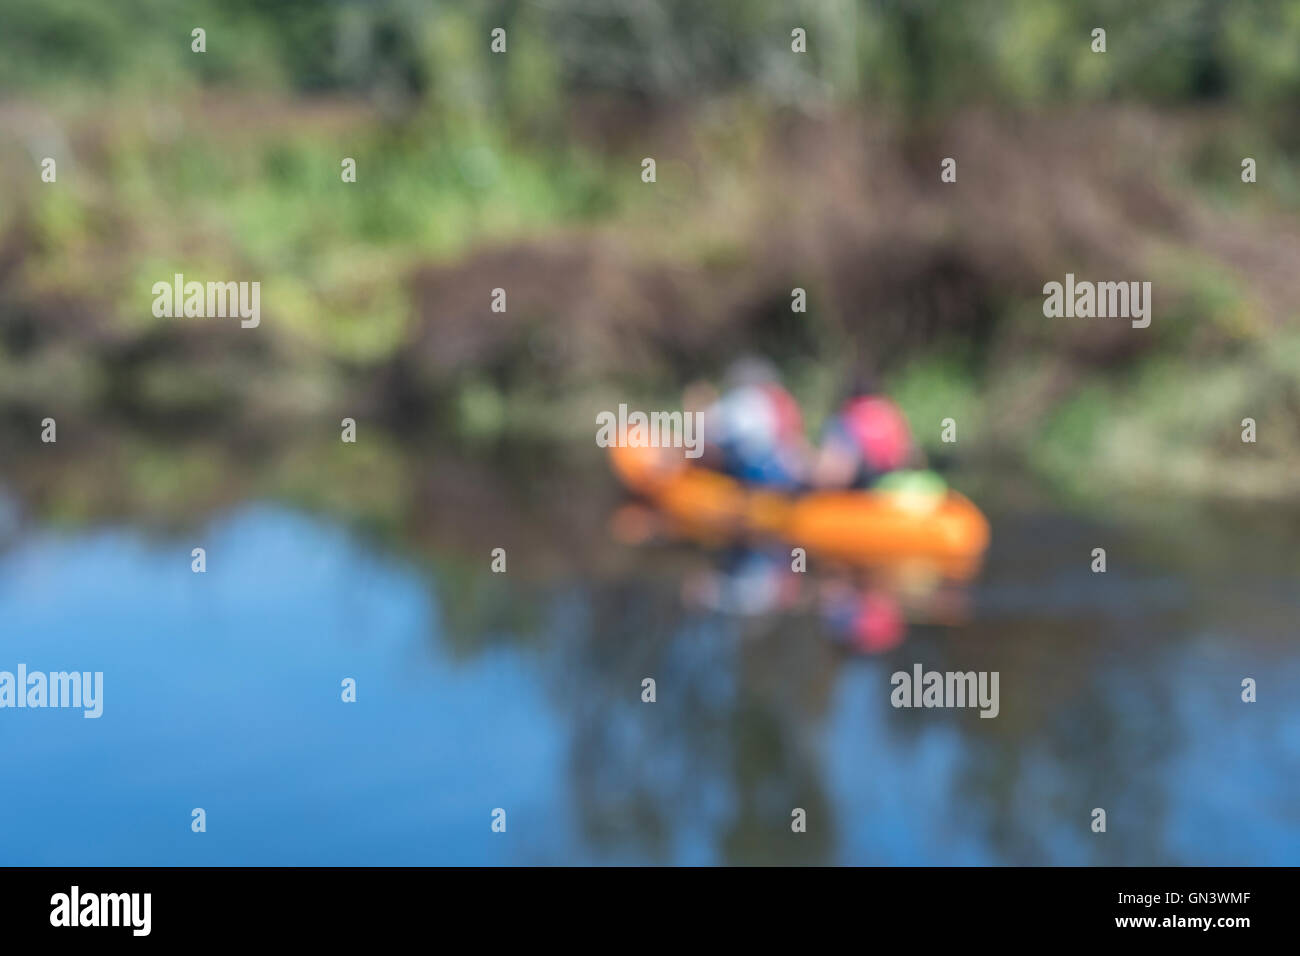 Blurry soft image of two canoeists as visual metaphor for concept of recreational / outdoor activities and leisure time. Stock Photo